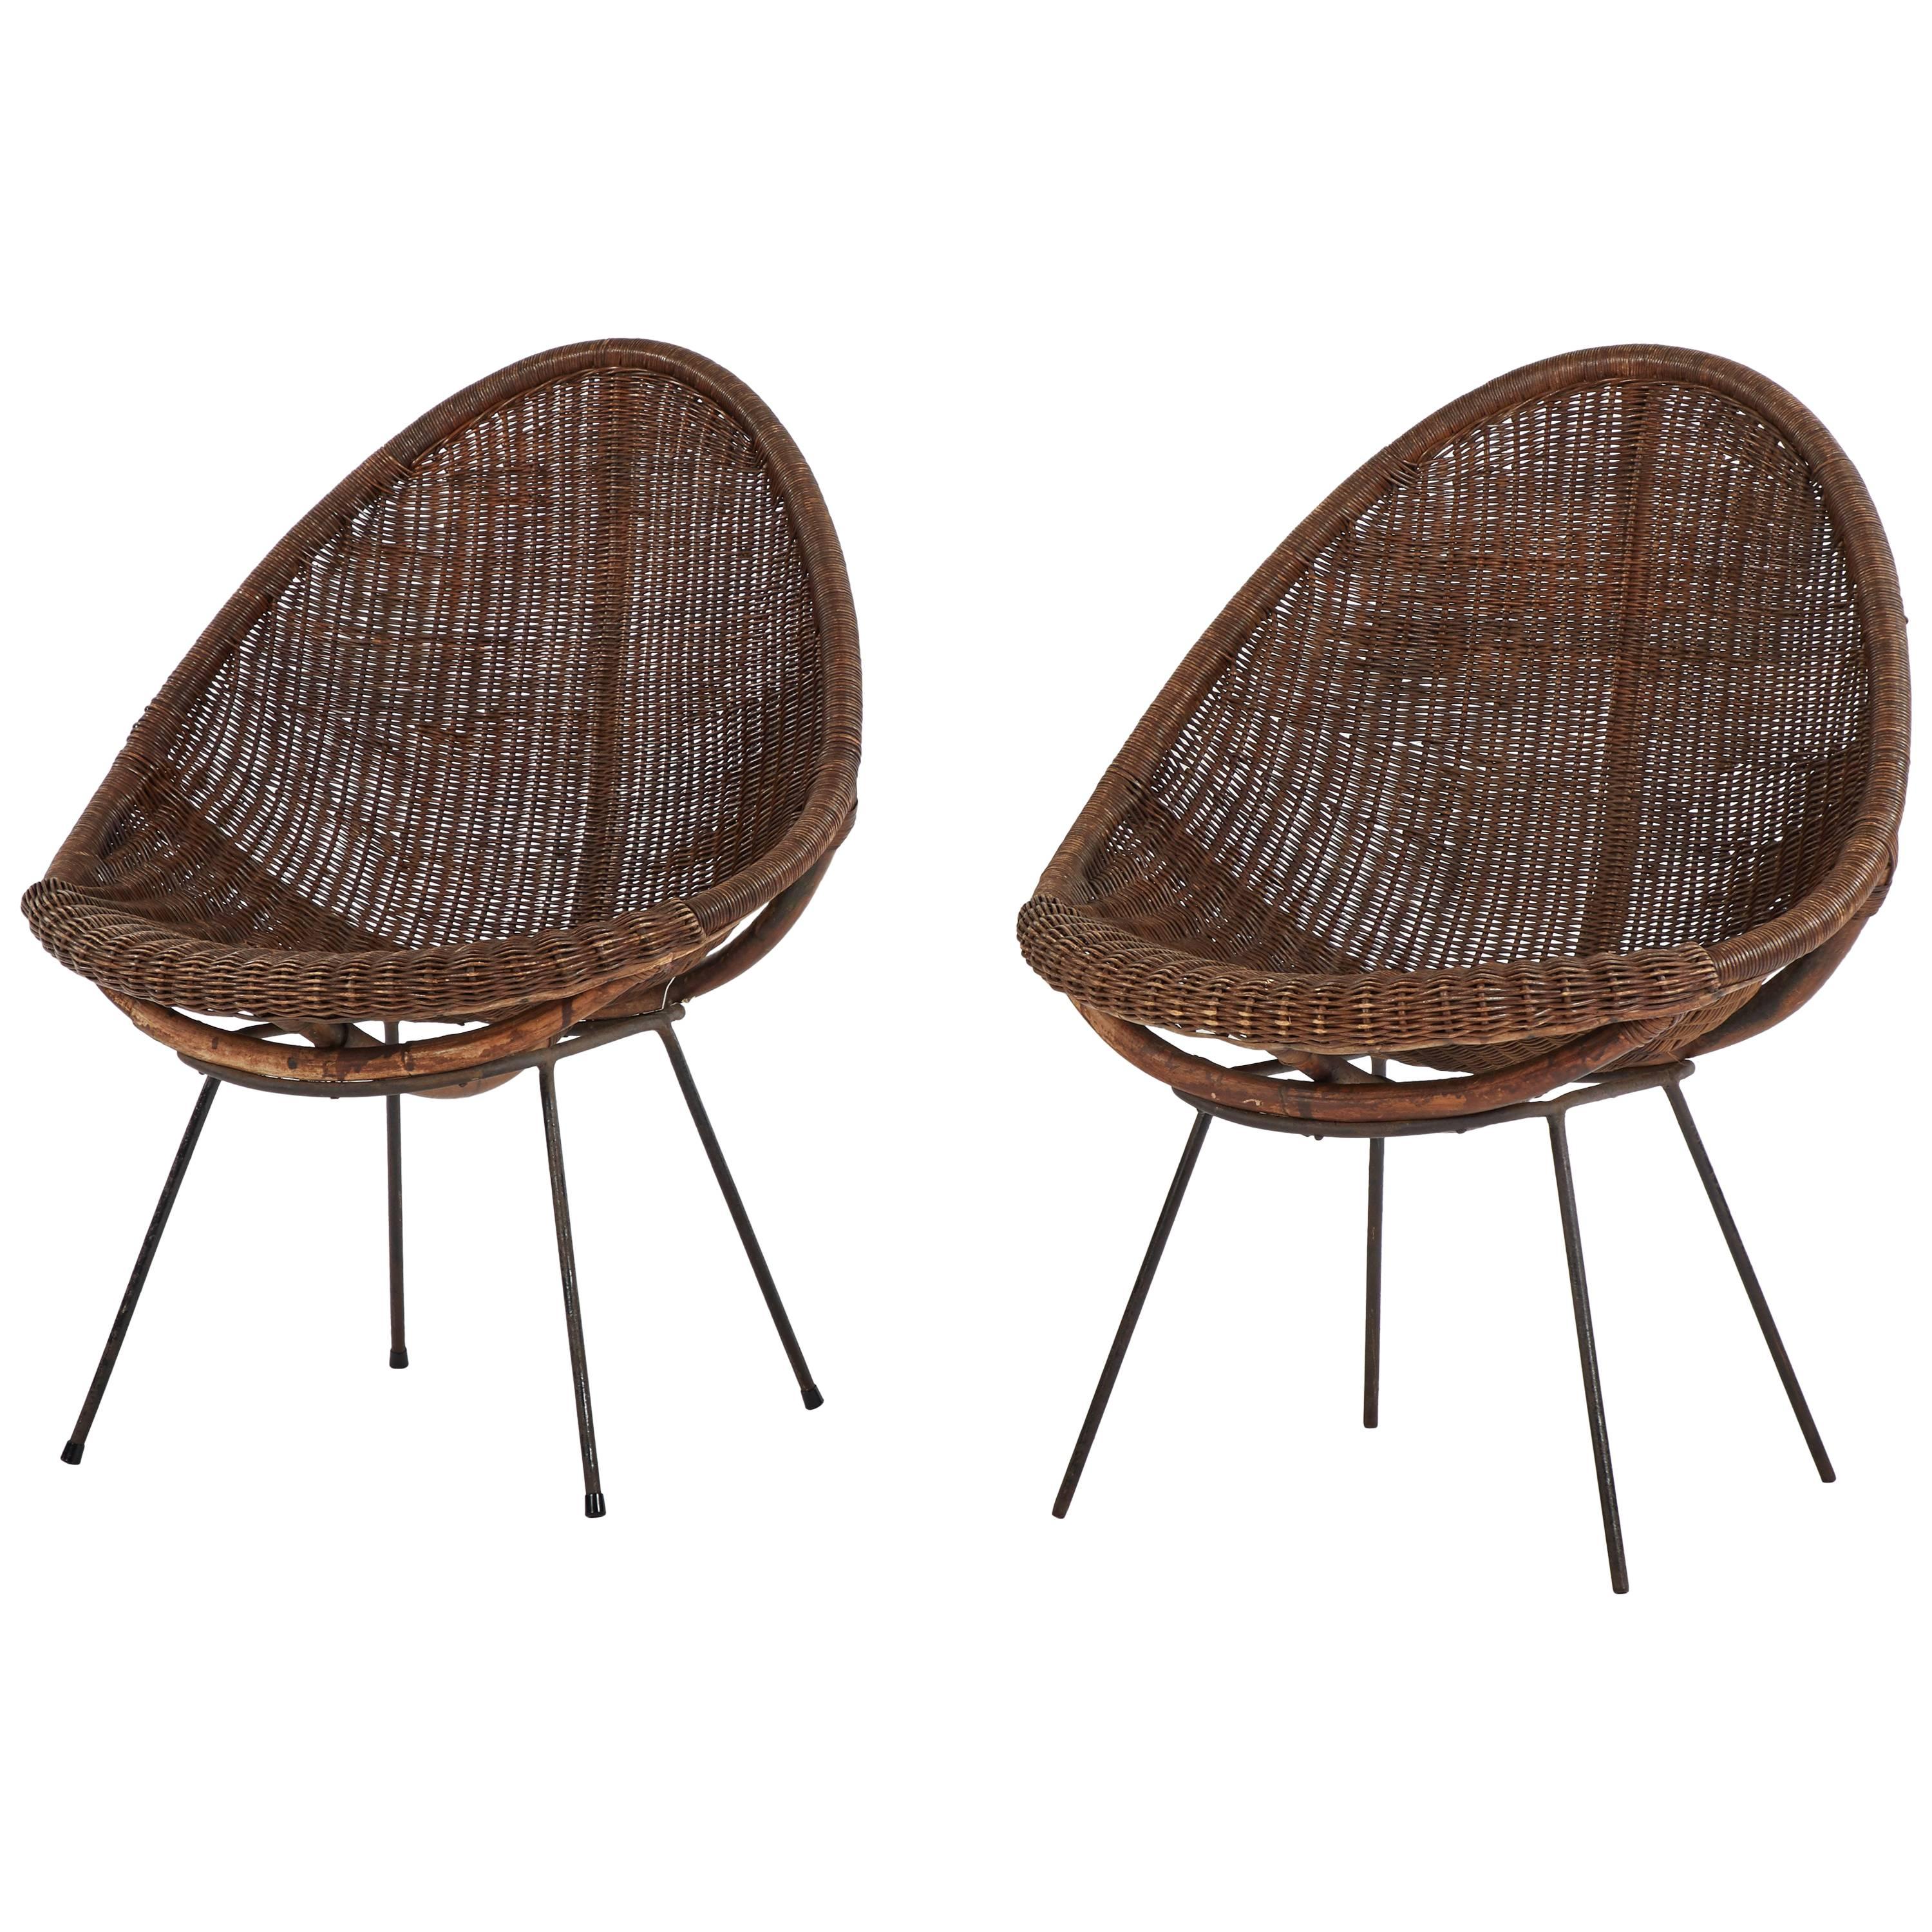 Pair of Mid-Century Bamboo and Rattan Chairs from France